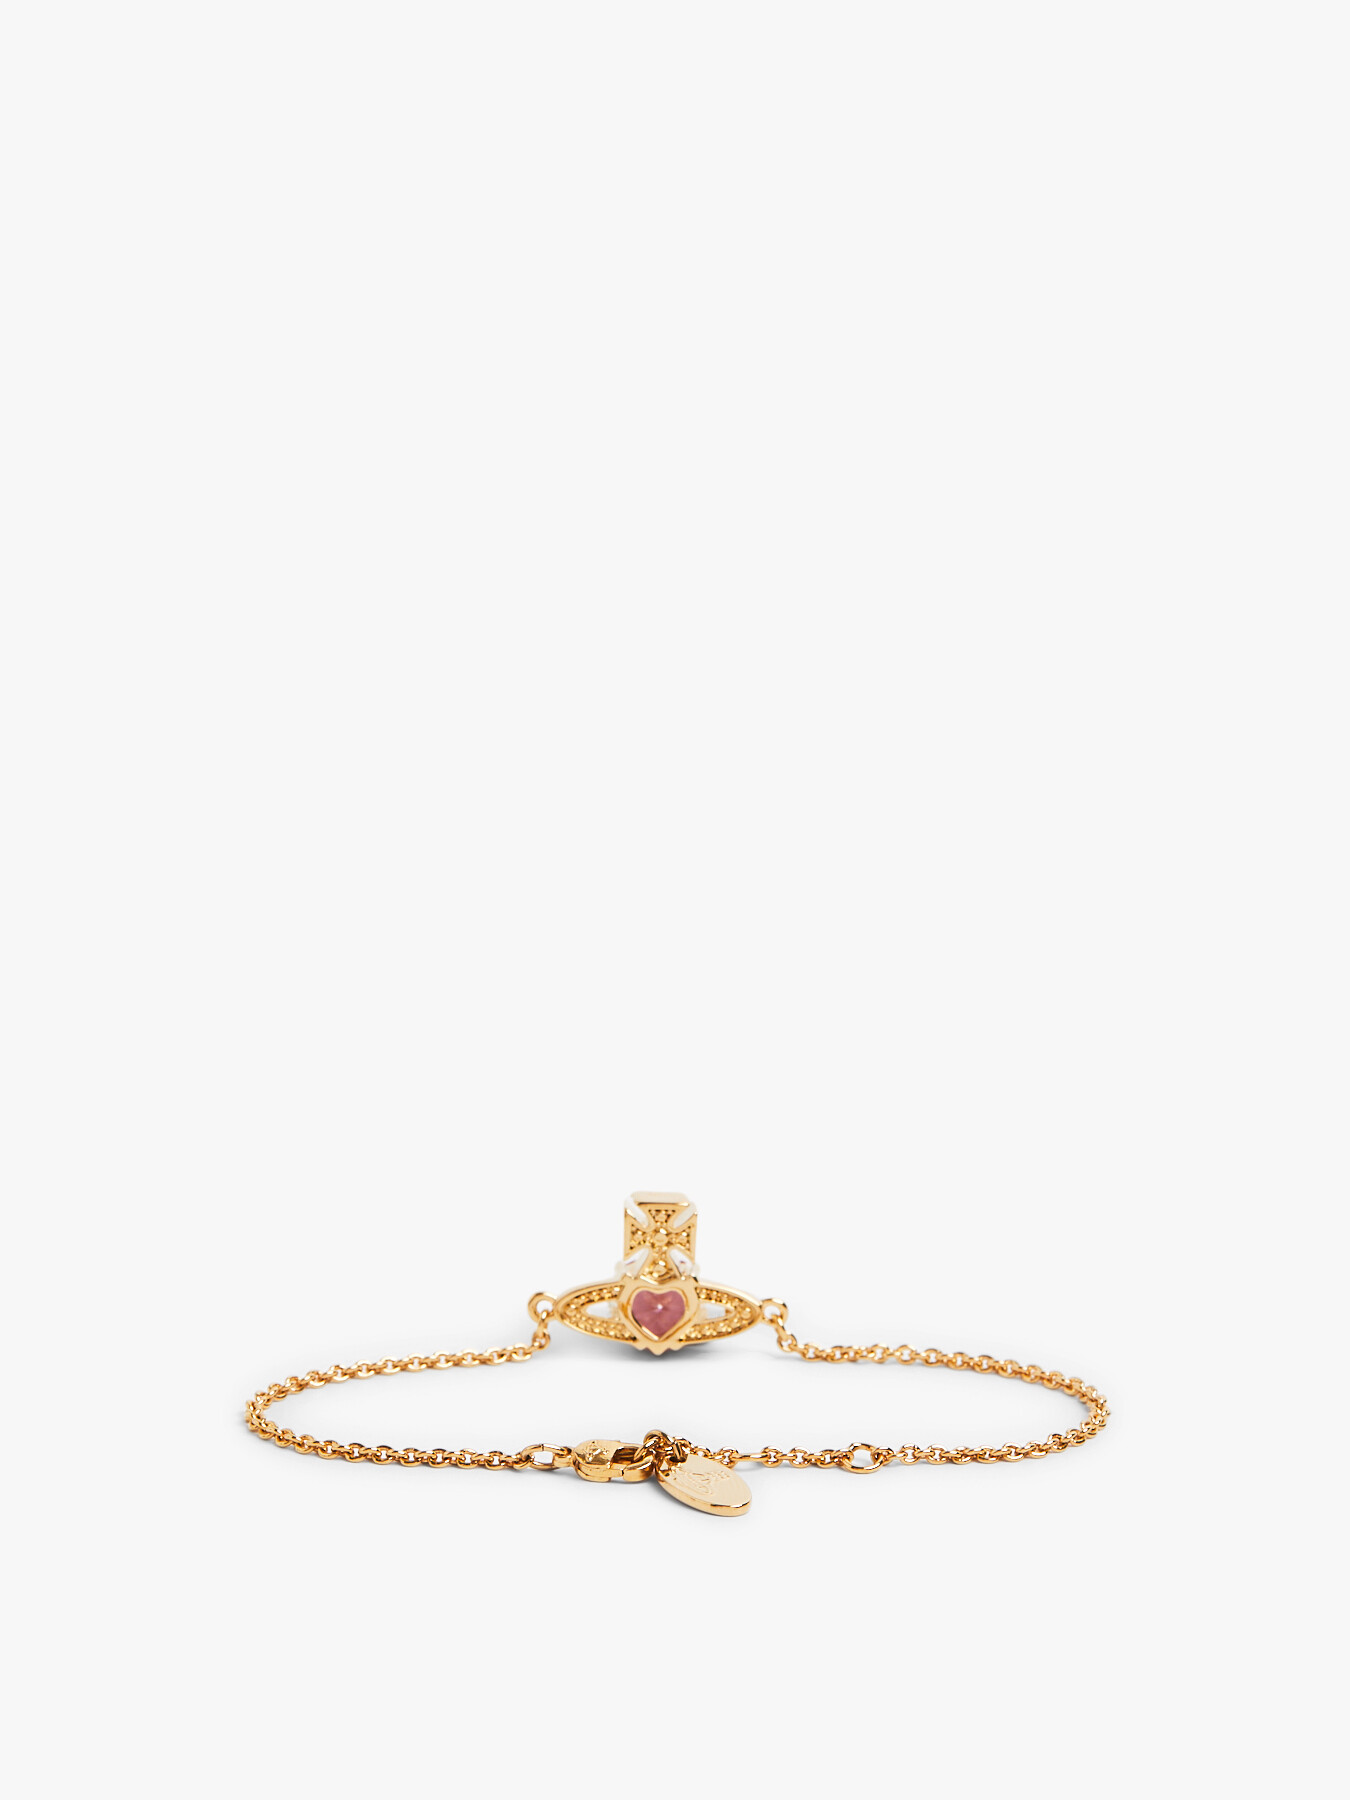 Coe & Co. - Just arrived… 🤩 Vivienne Westwood Petra and Ariella Bracelets  in Red & Rose ❤️‍🔥 Shop in-store and online… 🌹 Petra -  https://coeandcostores.com/vivienne-westwood-petra-bracelet-rose-gold-red-pearl.html  Ariella - https://coeandcostores ...